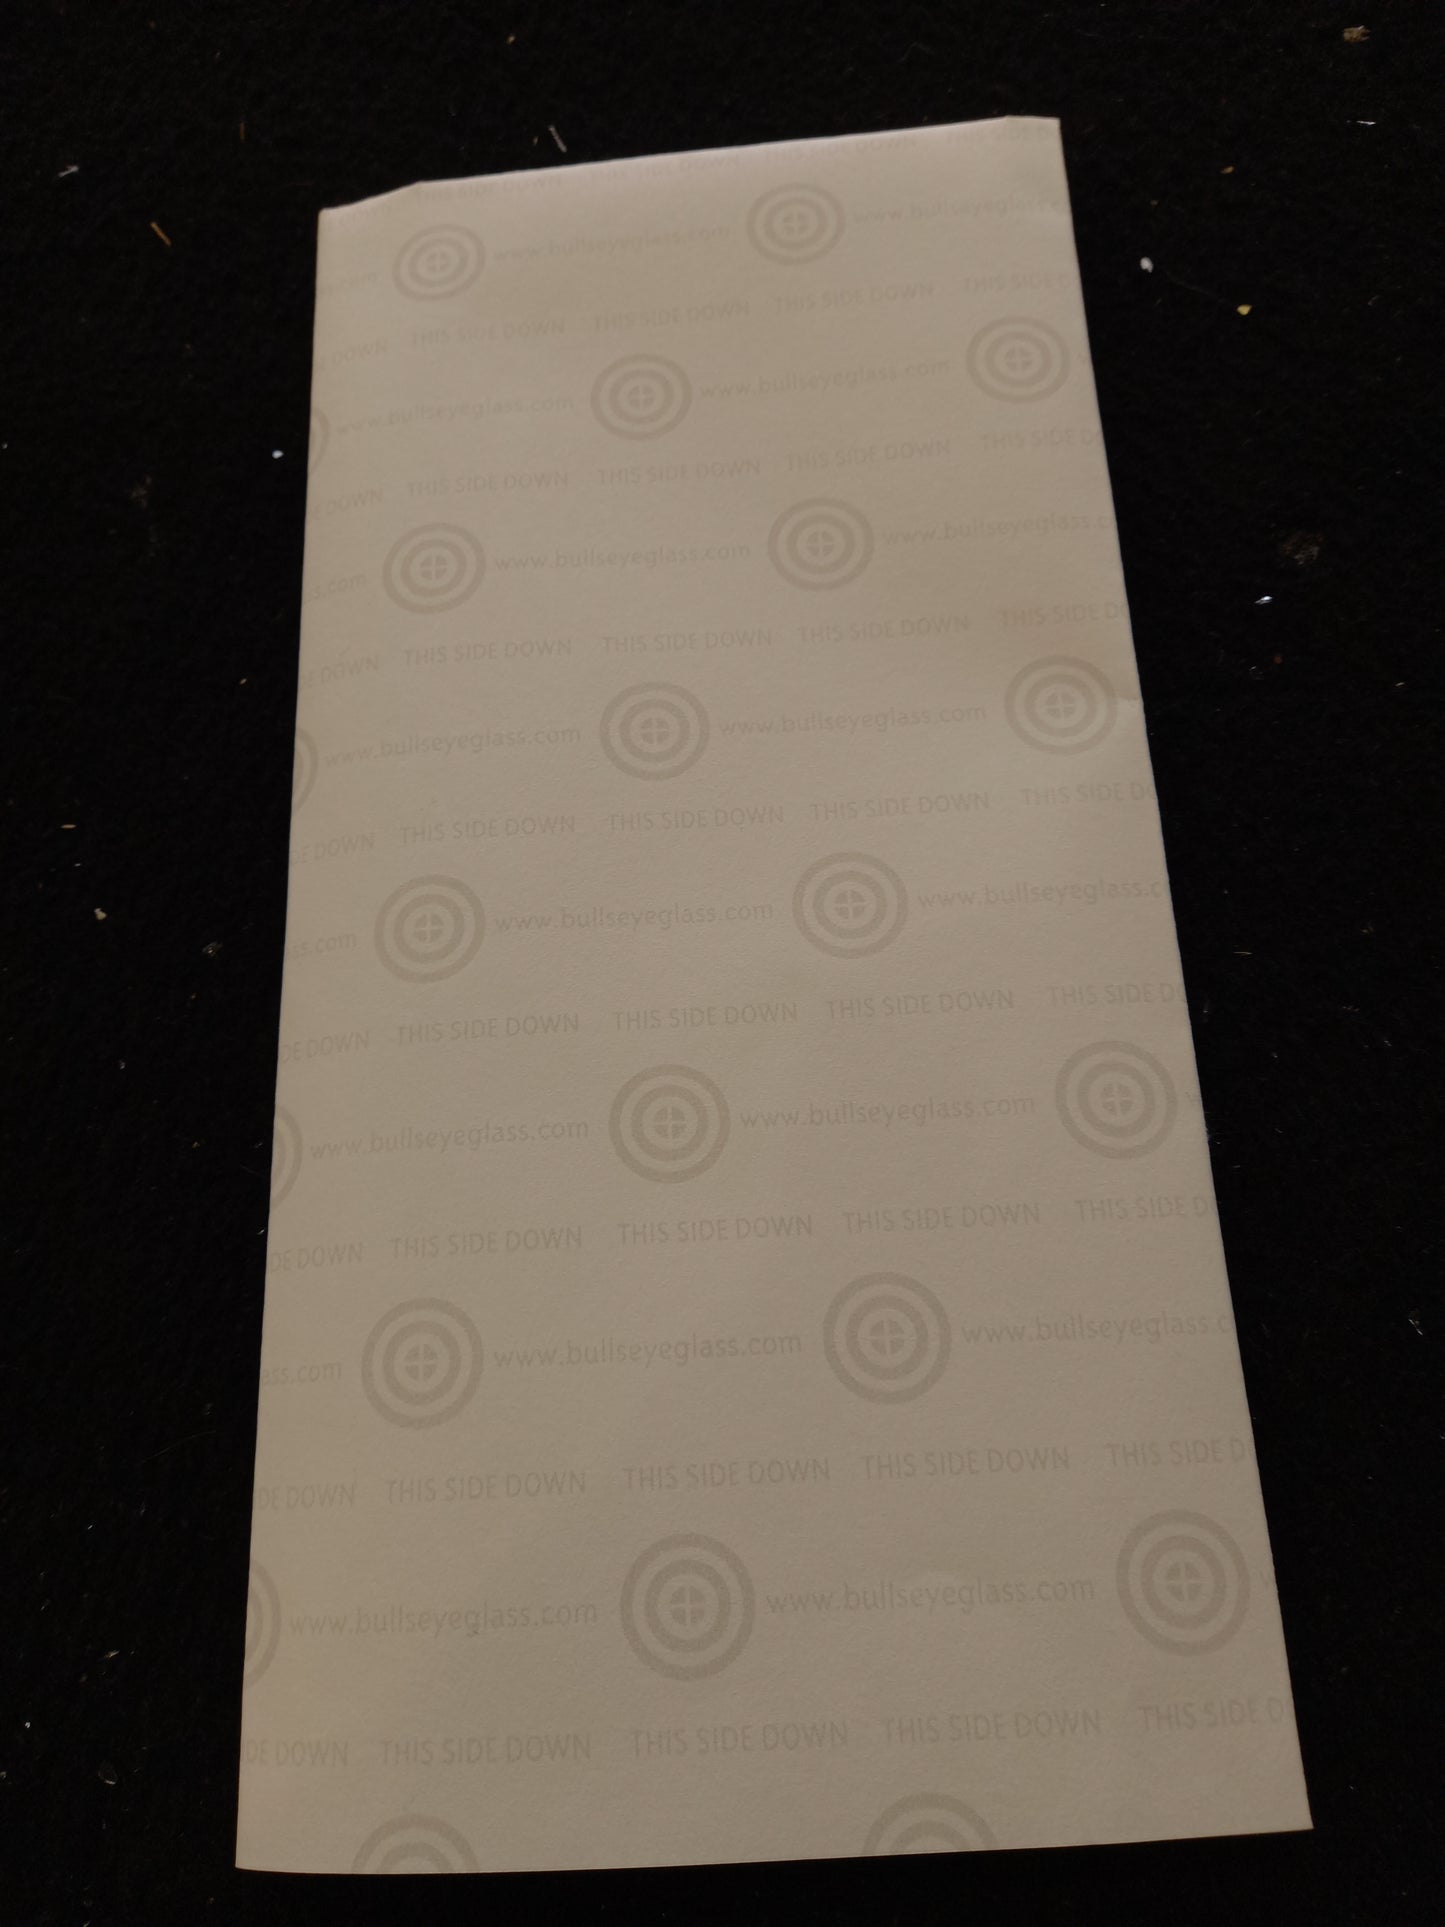 Bullseye Thinfire Kiln Paper - 520mm square FOLDED in 8 (sent in a courier bag)